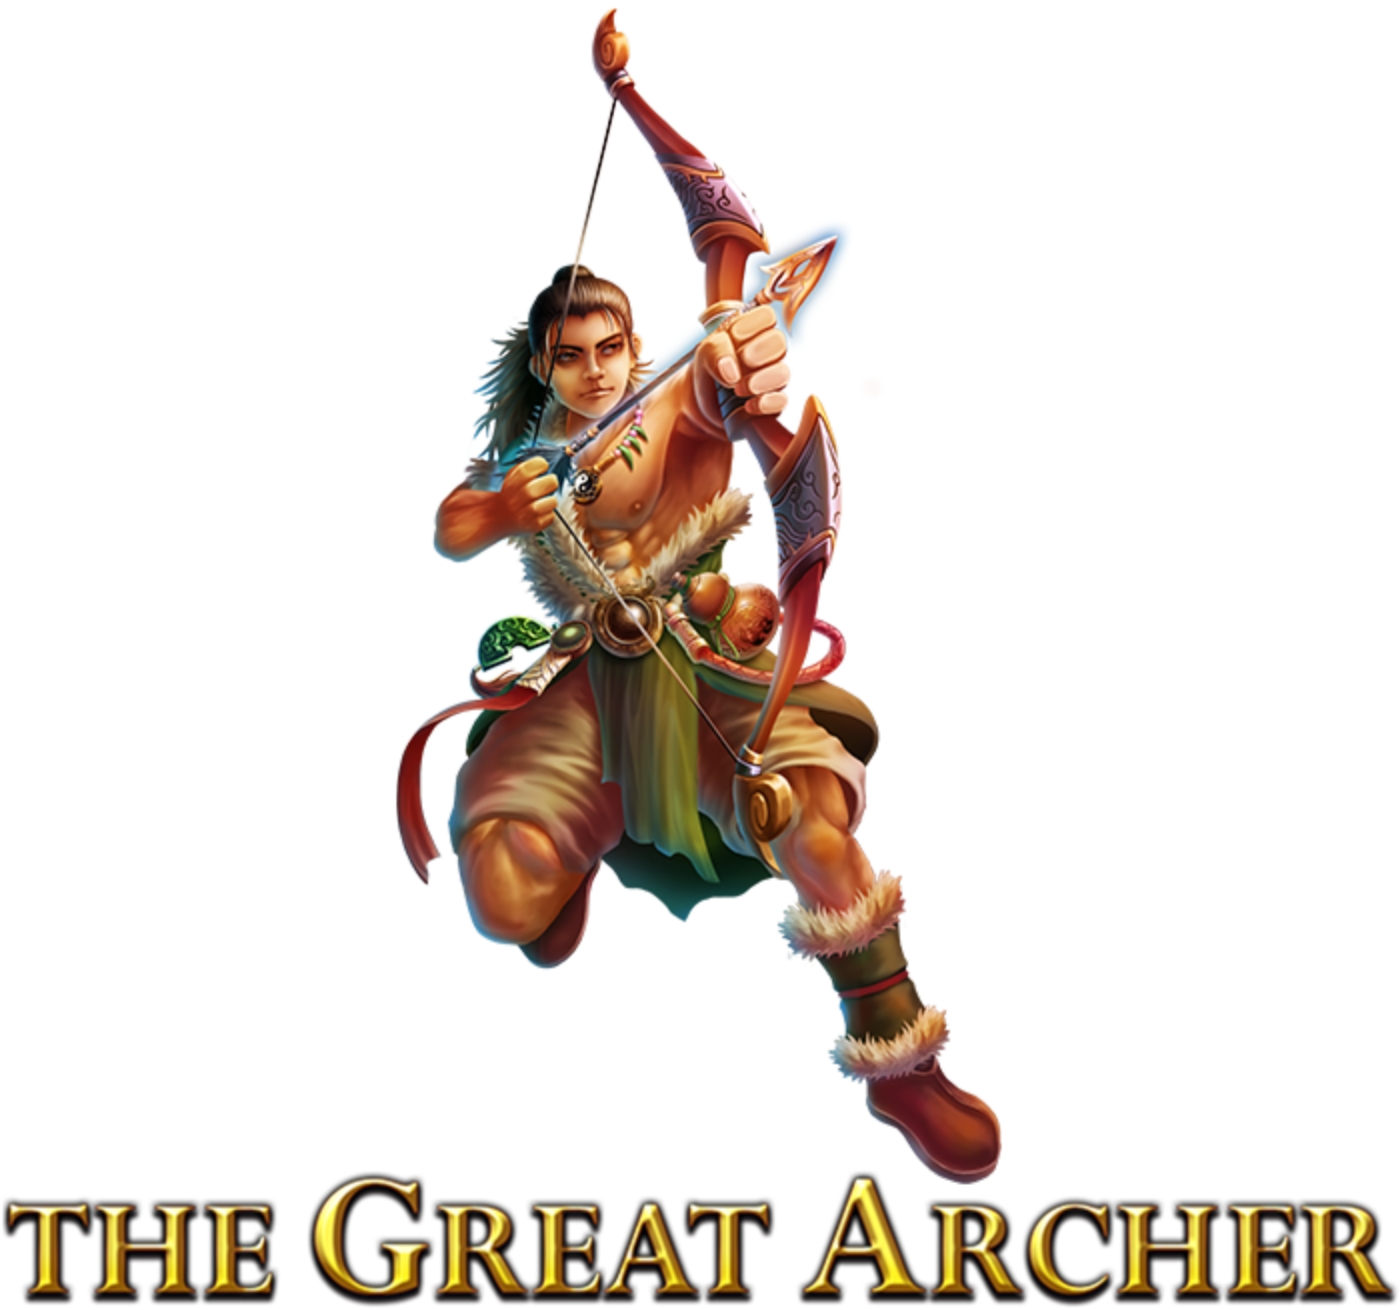 The Great Archer demo